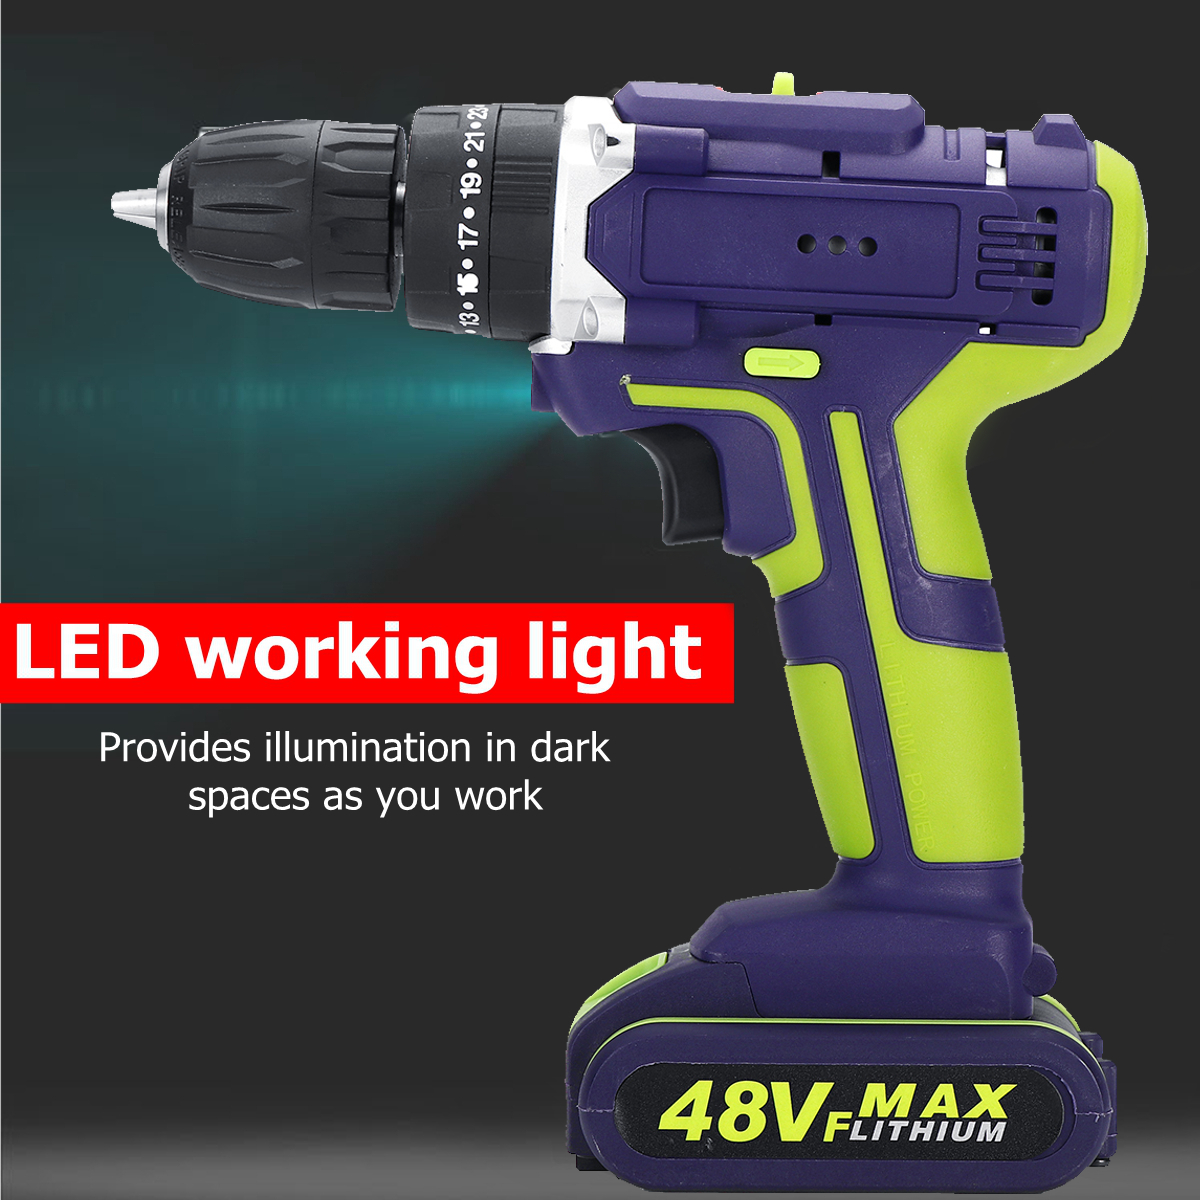 100-240V-50Nm-3-In-1-Electric-Hammer-Drill-Cordless-Drill-Double-Speed-Power-Drills-1809843-11